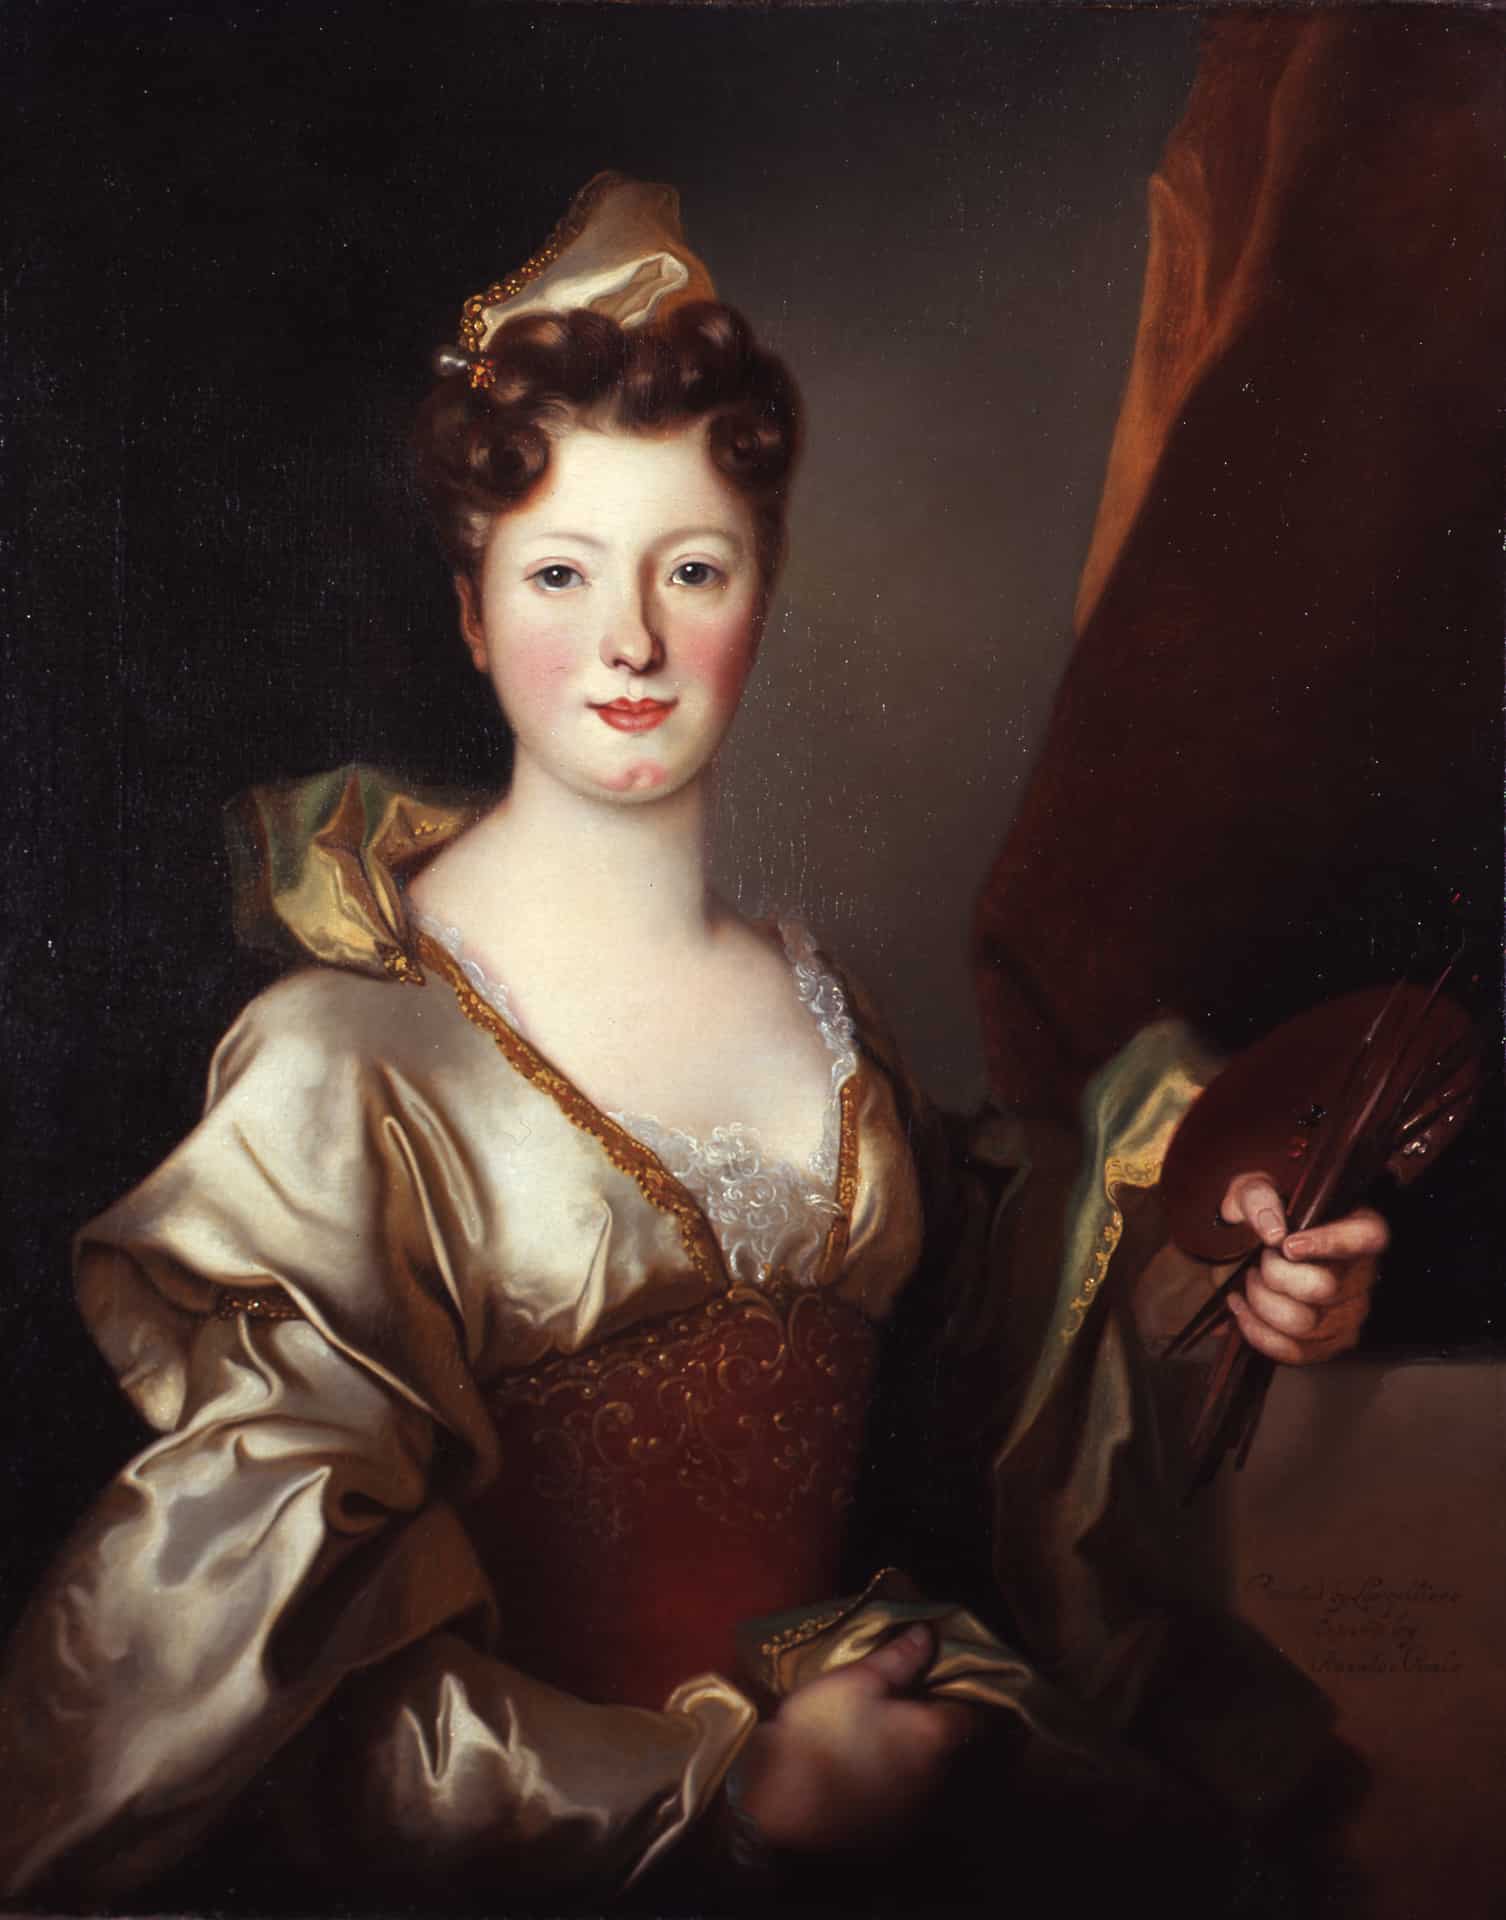 a portrait of an elegantly dressed woman holding an artist's palette and brushes